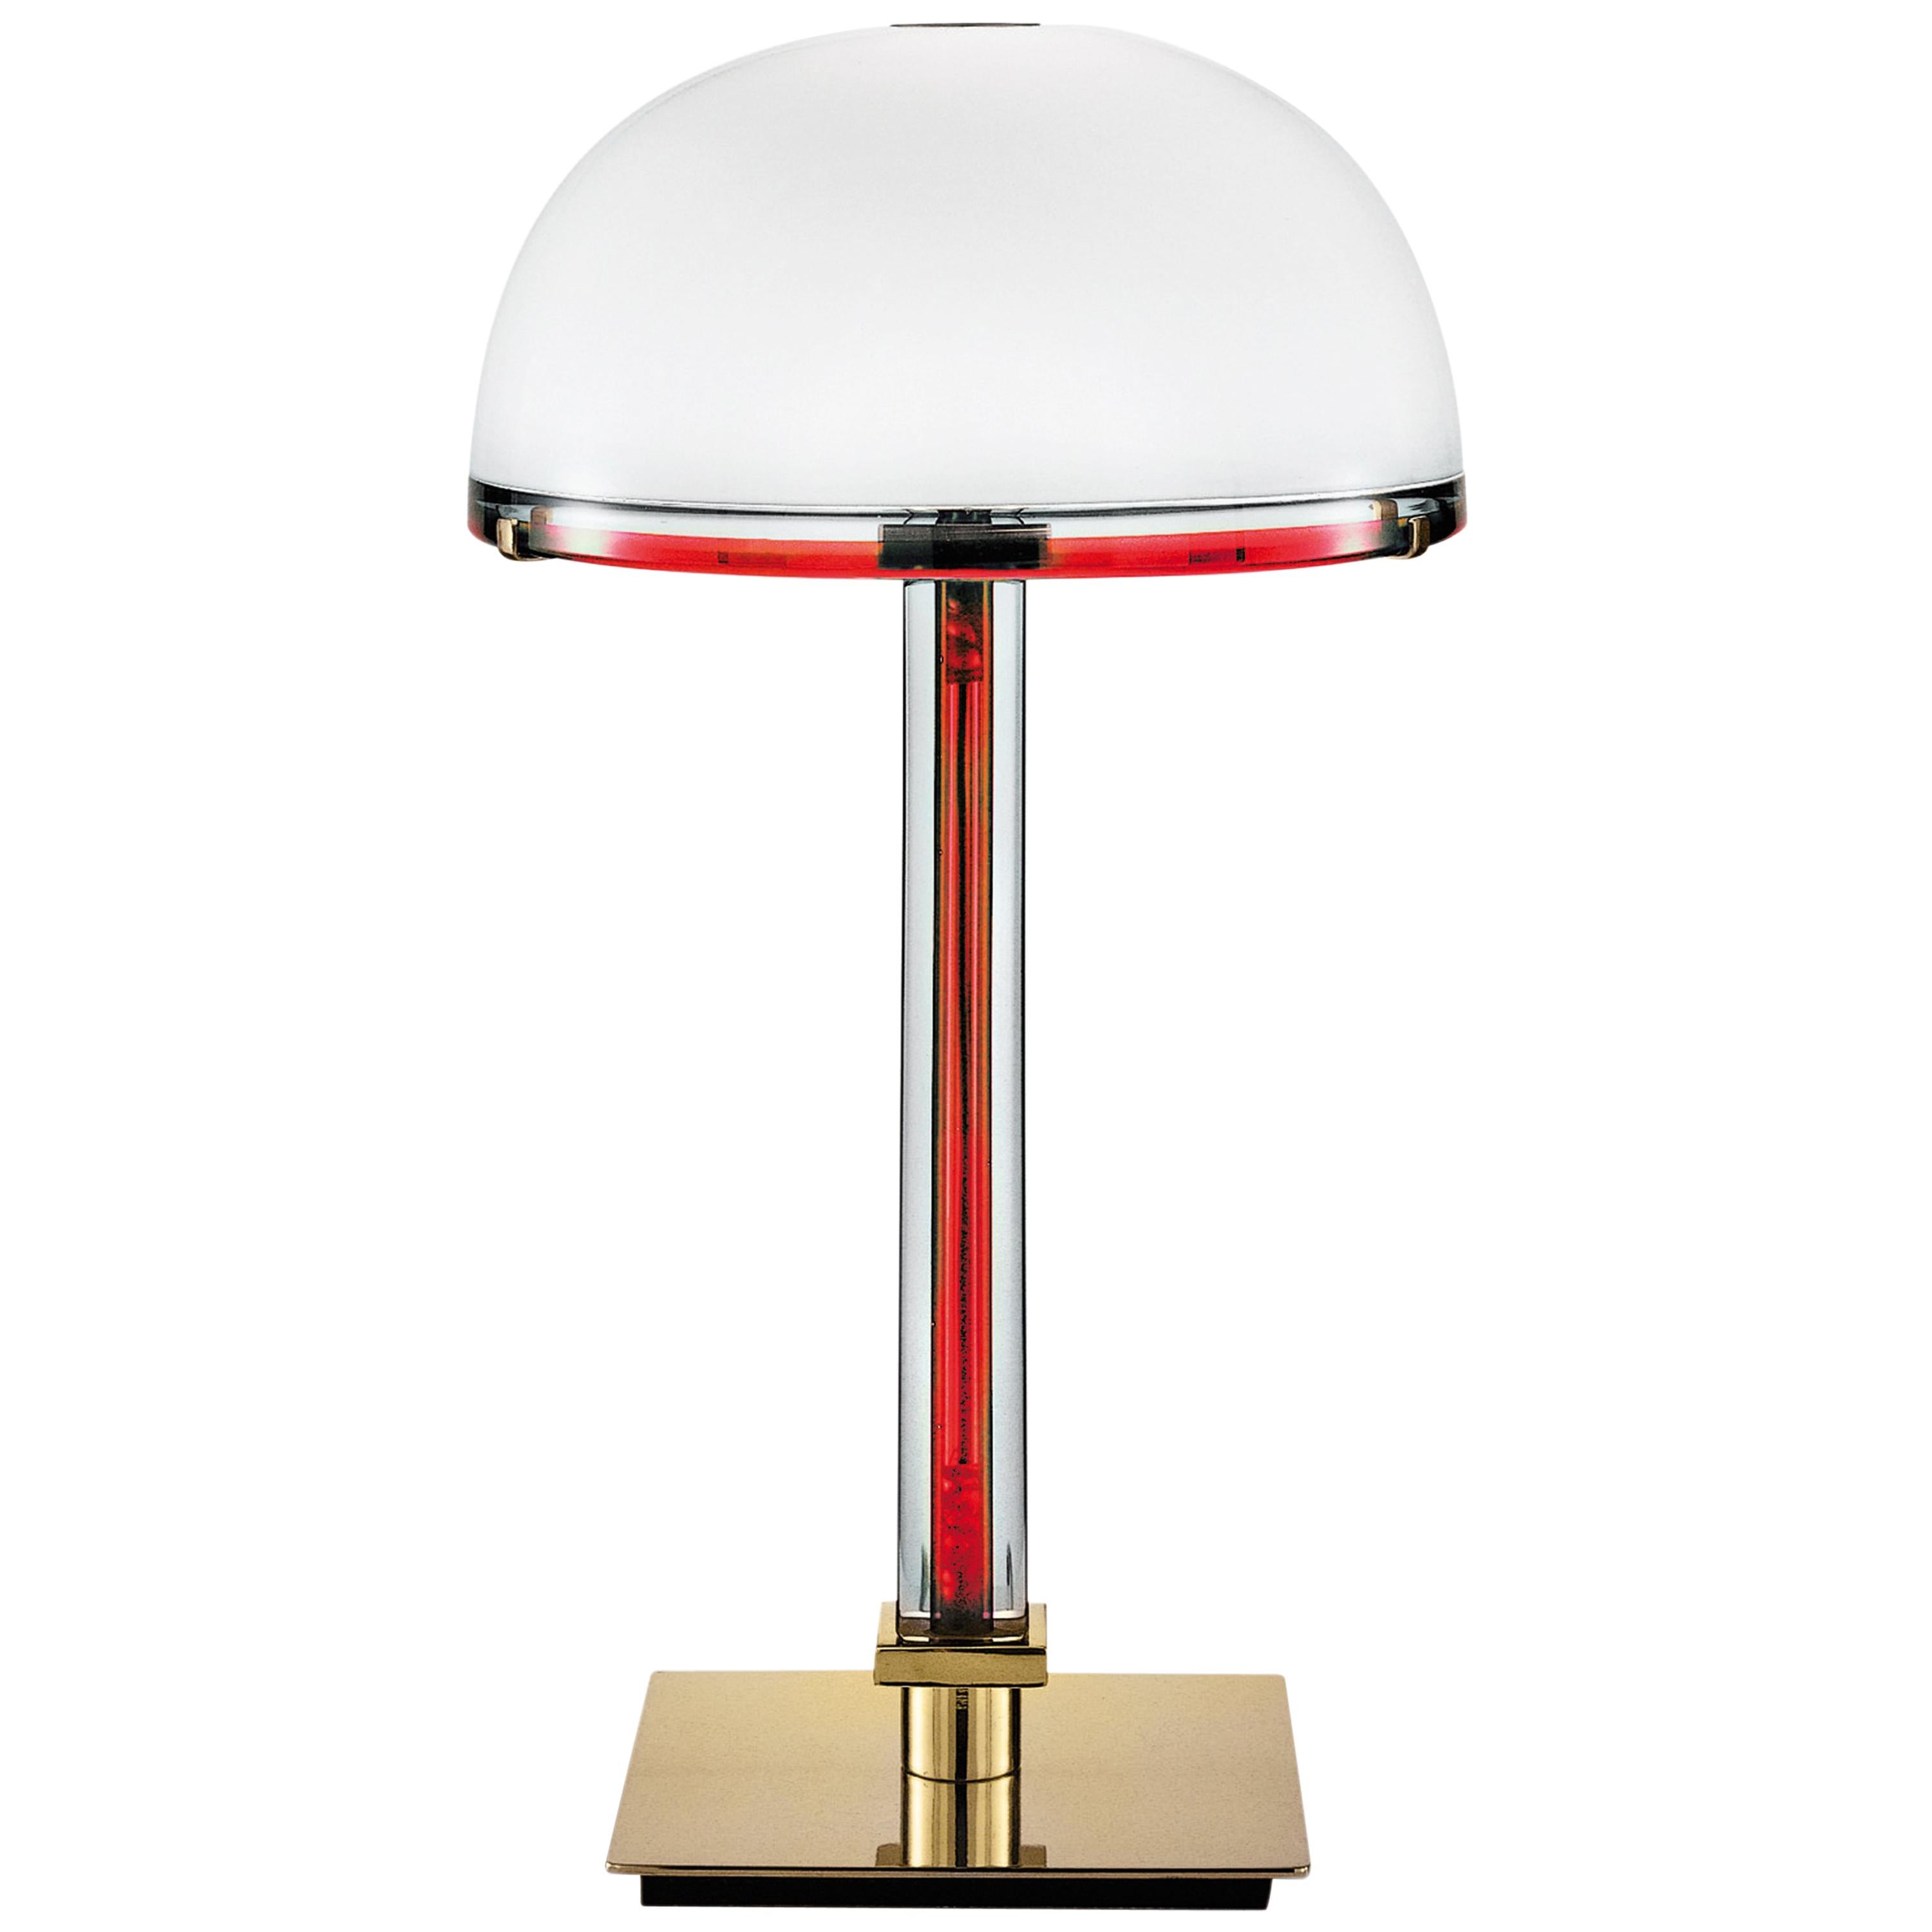 Venini Belboi Table Lamp in Milk White, Crystal, and Red with Gold Hardware